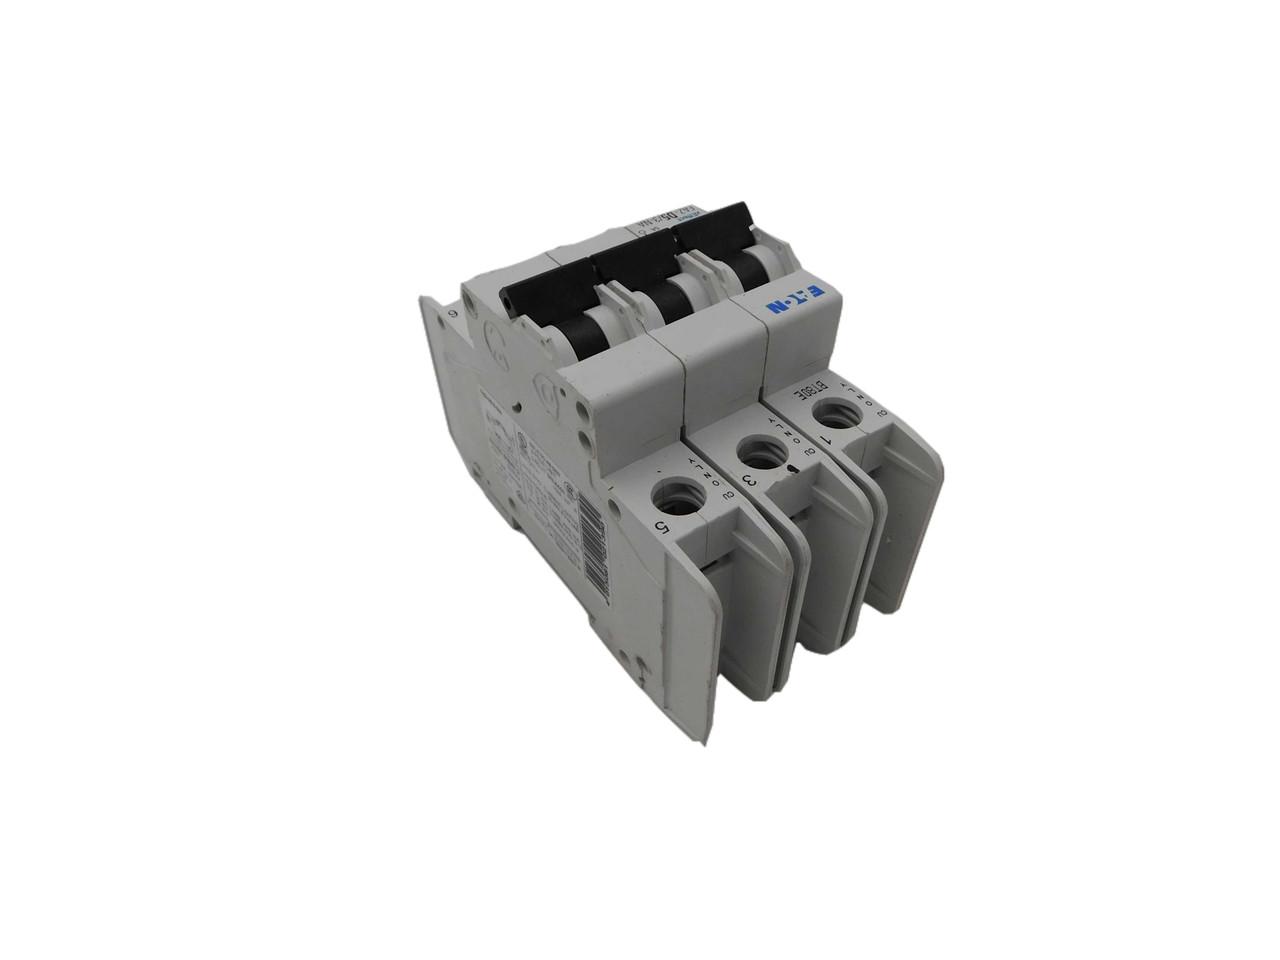 Eaton FAZ-D5/3-NA 277/480 VAC, 96 VDC, 5 A, 10 kA, 10 to 20 x Rated Current, 3-Pole, Screw Terminal, DIN Rail Mount, Current Limiting, Thermal Magnetic